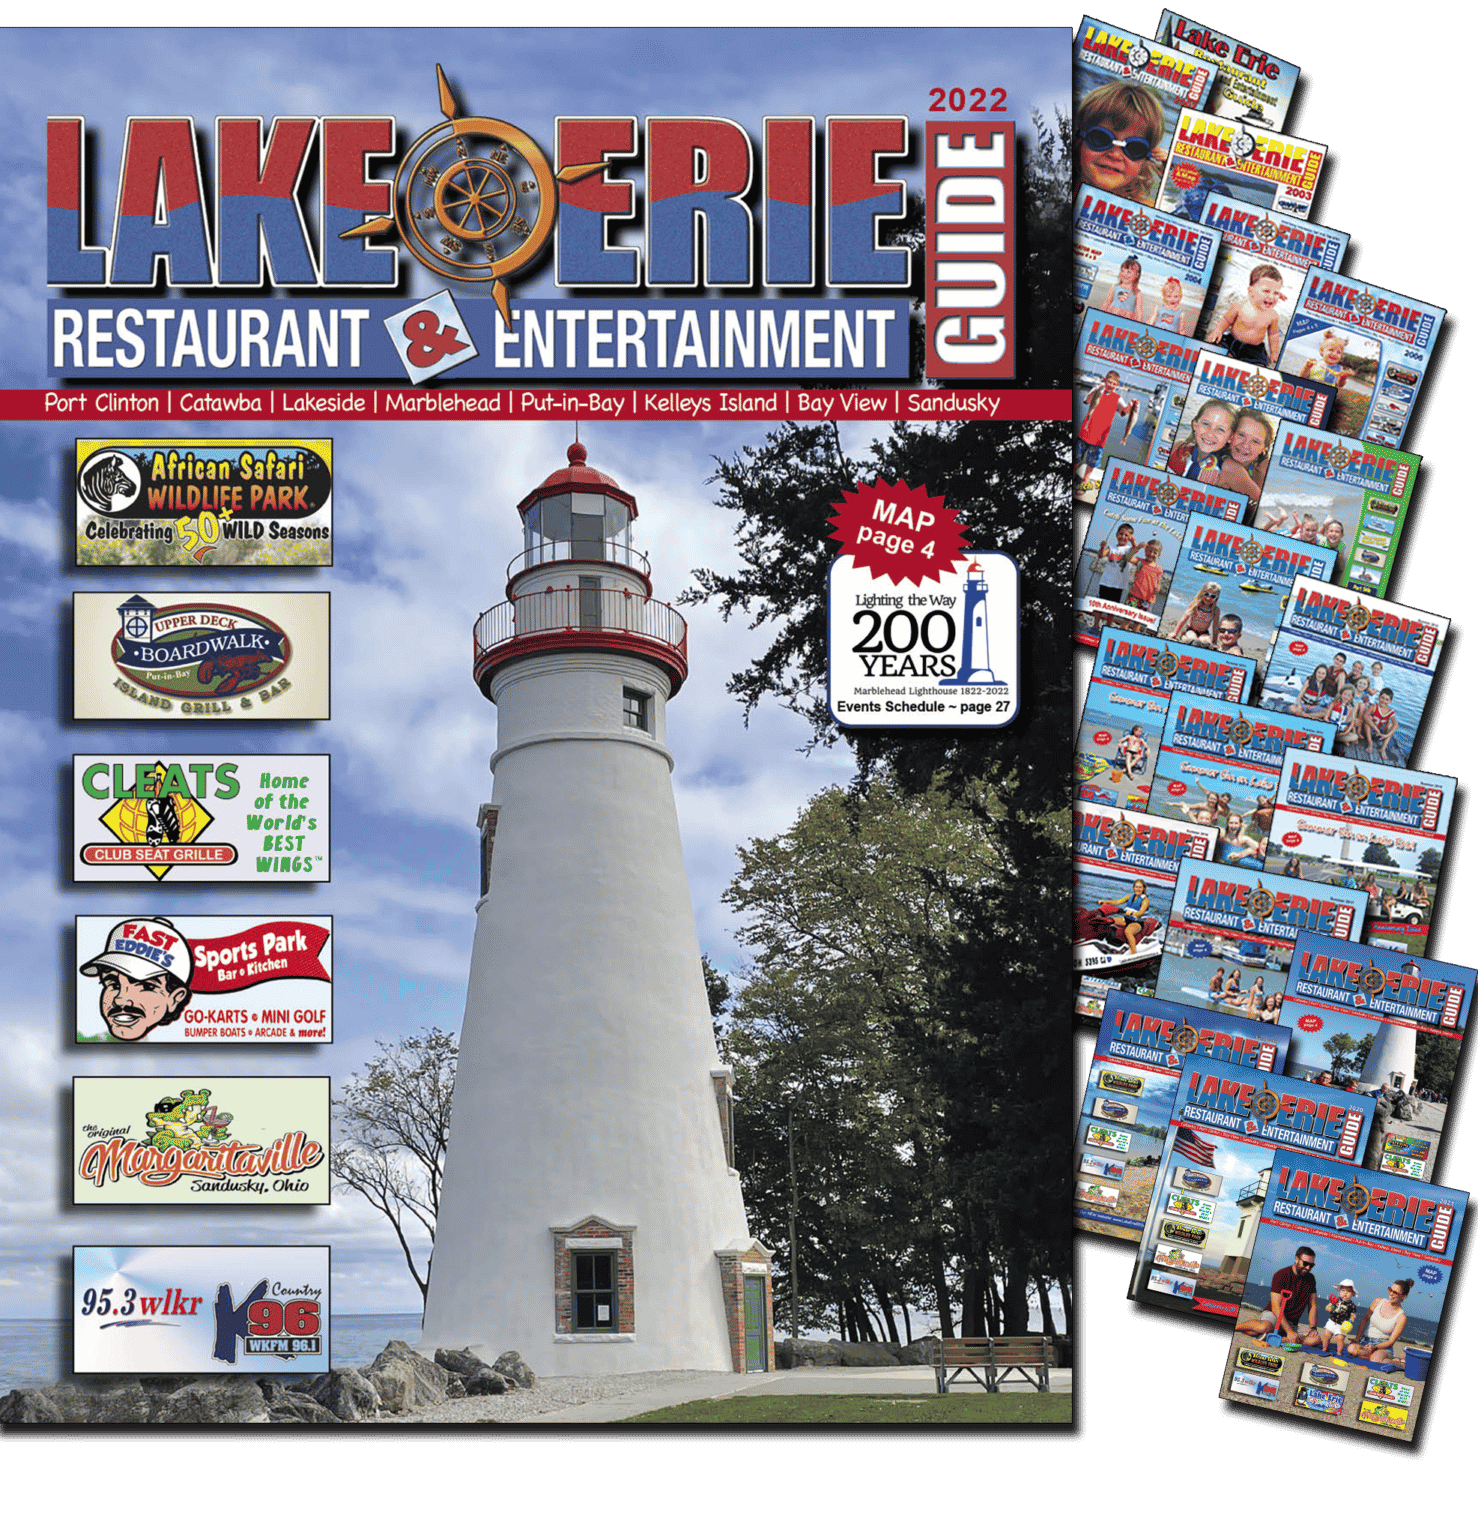 to Vacationland! Lake Erie Restaurant and Entertainment Guide